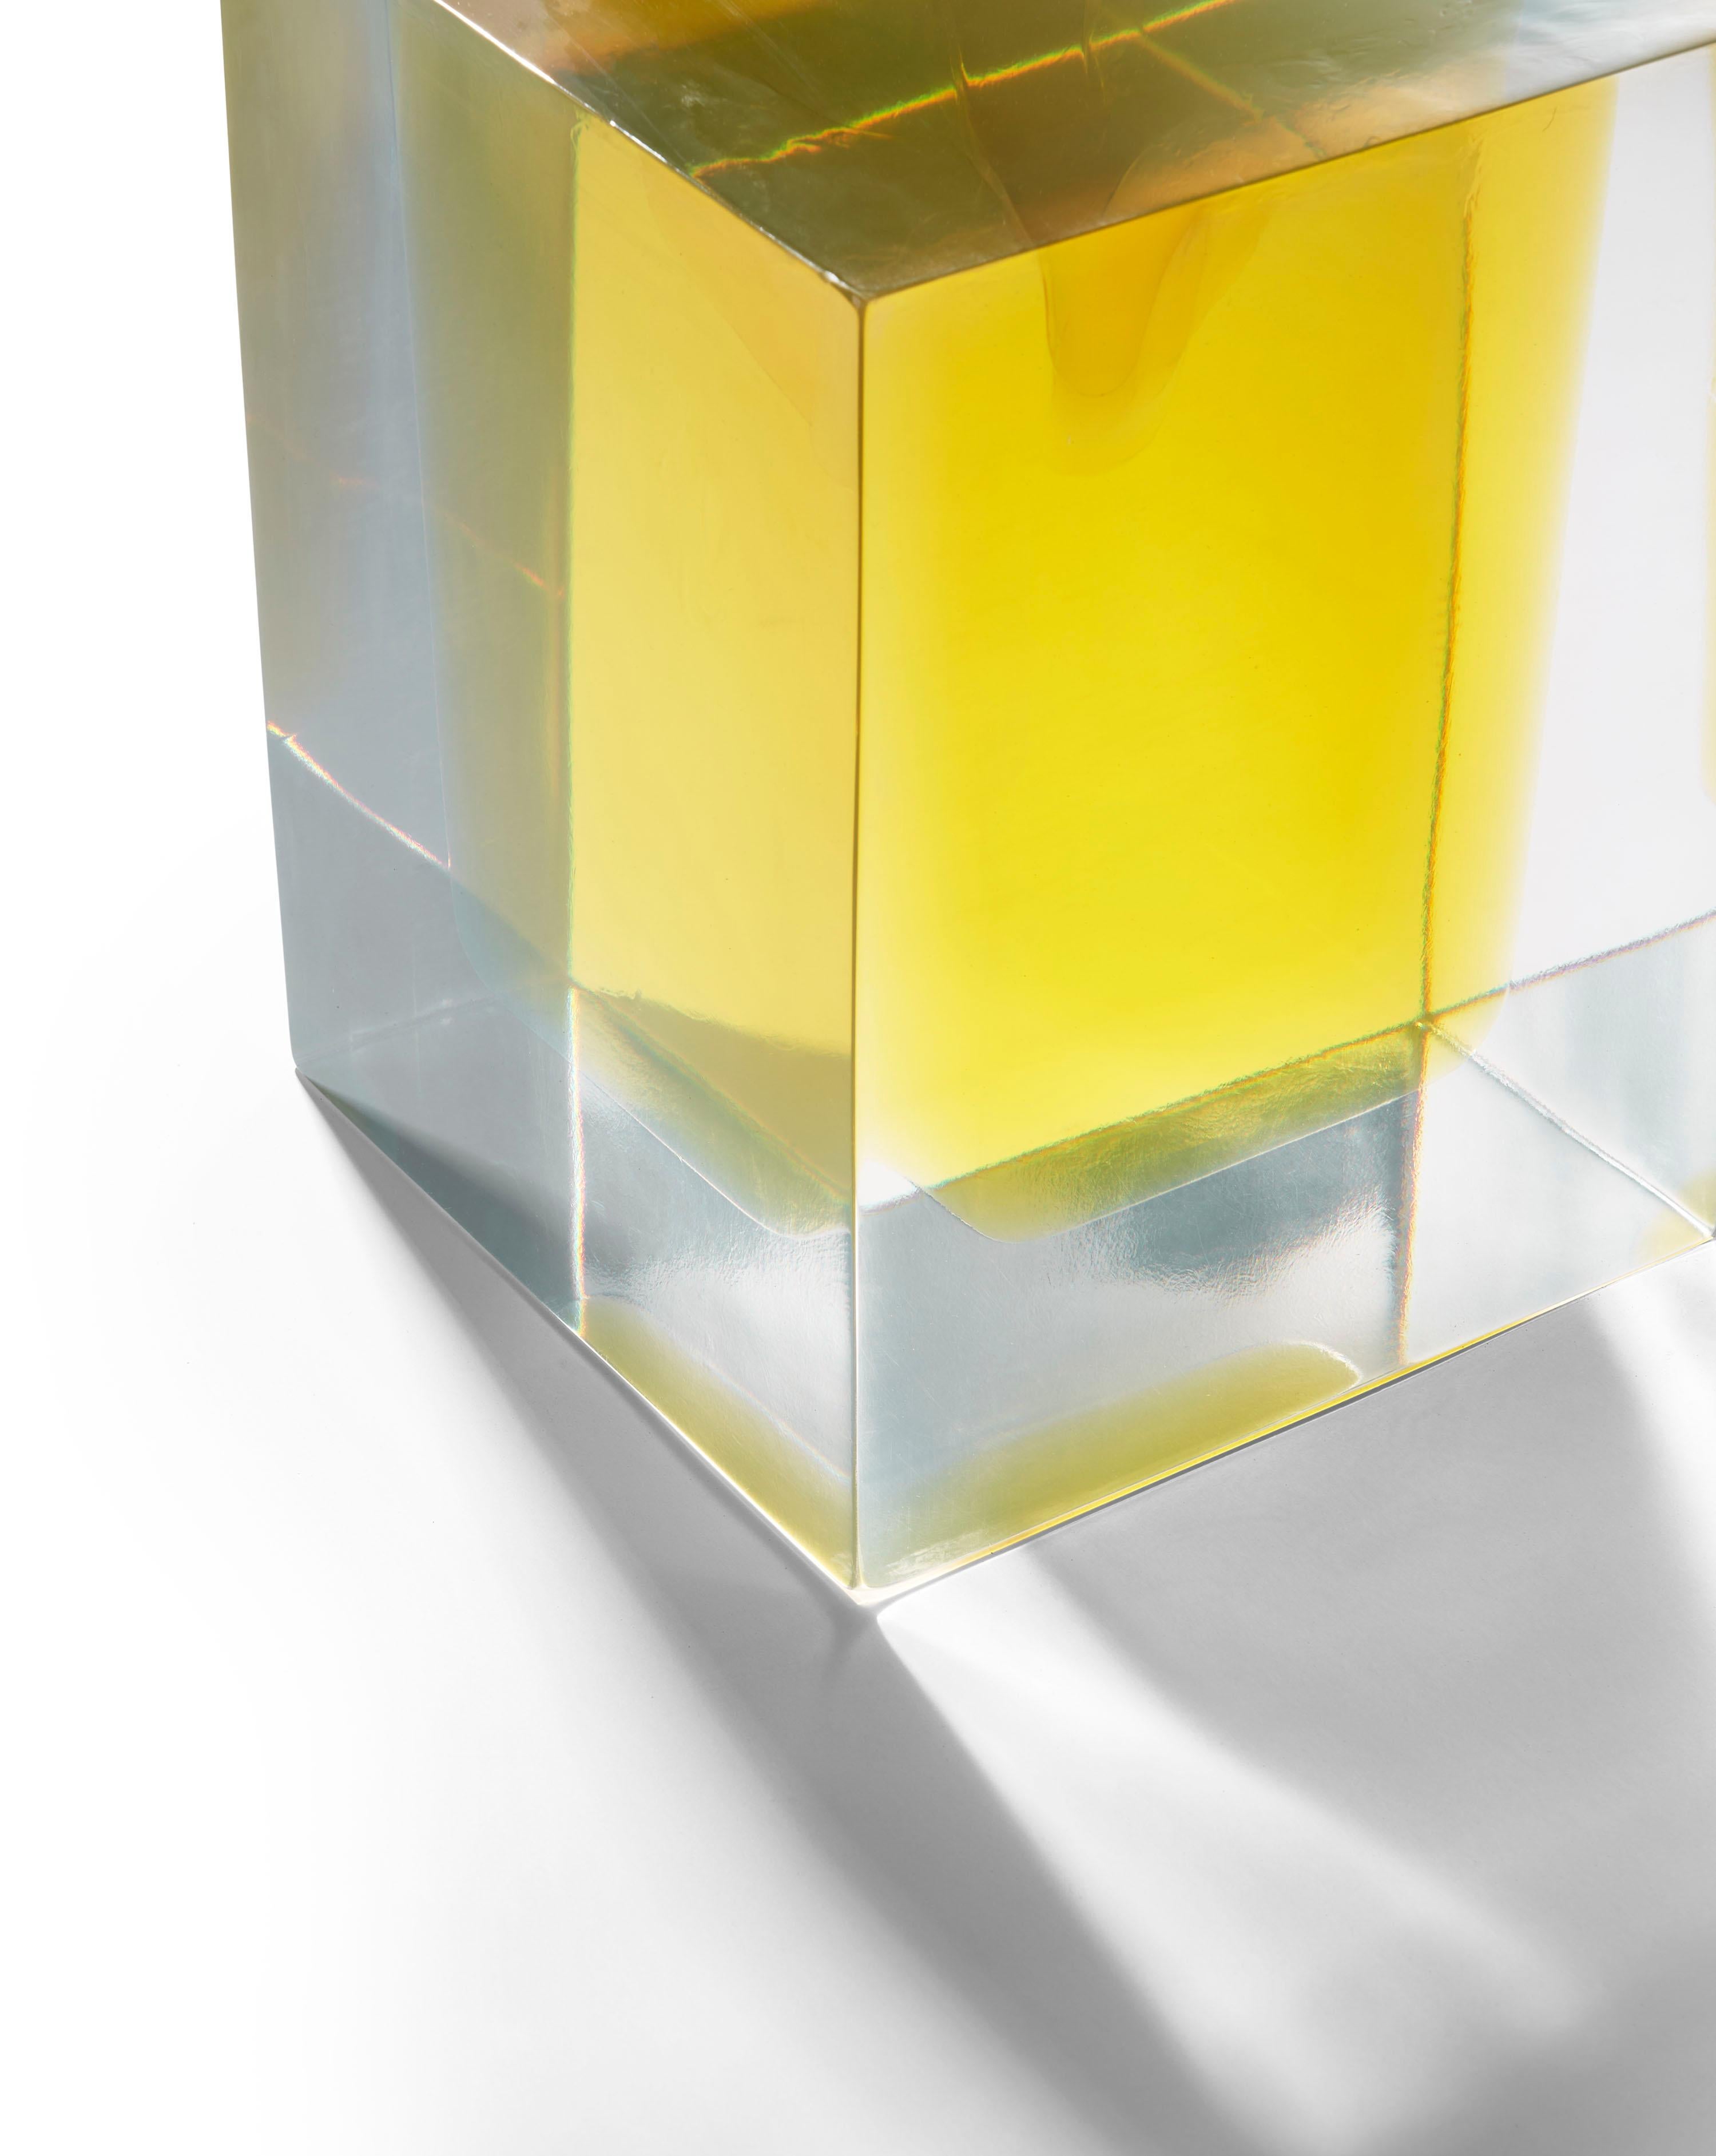 Item No: TA-026

Integrating clear and colored resins in stunning simplicity, the Dark and Stormy Table both captures and casts light in the surrounding space, creating colorful 